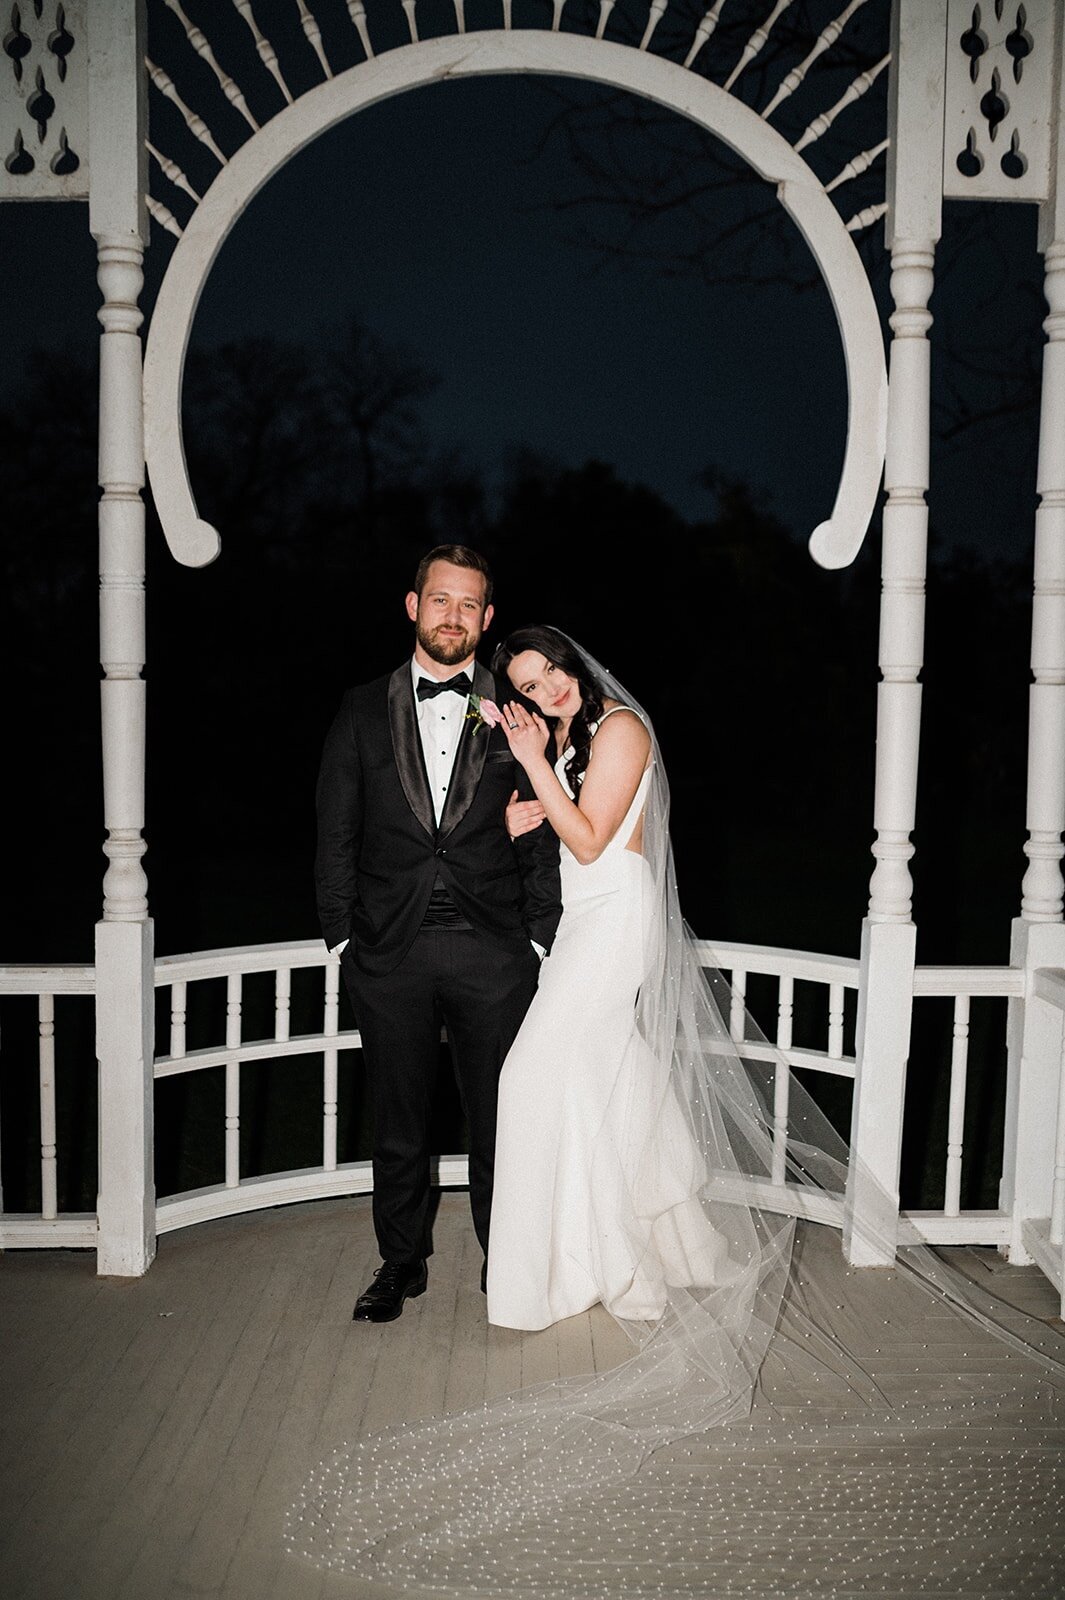 night-time-portaits-bride-groom-barr-mansion